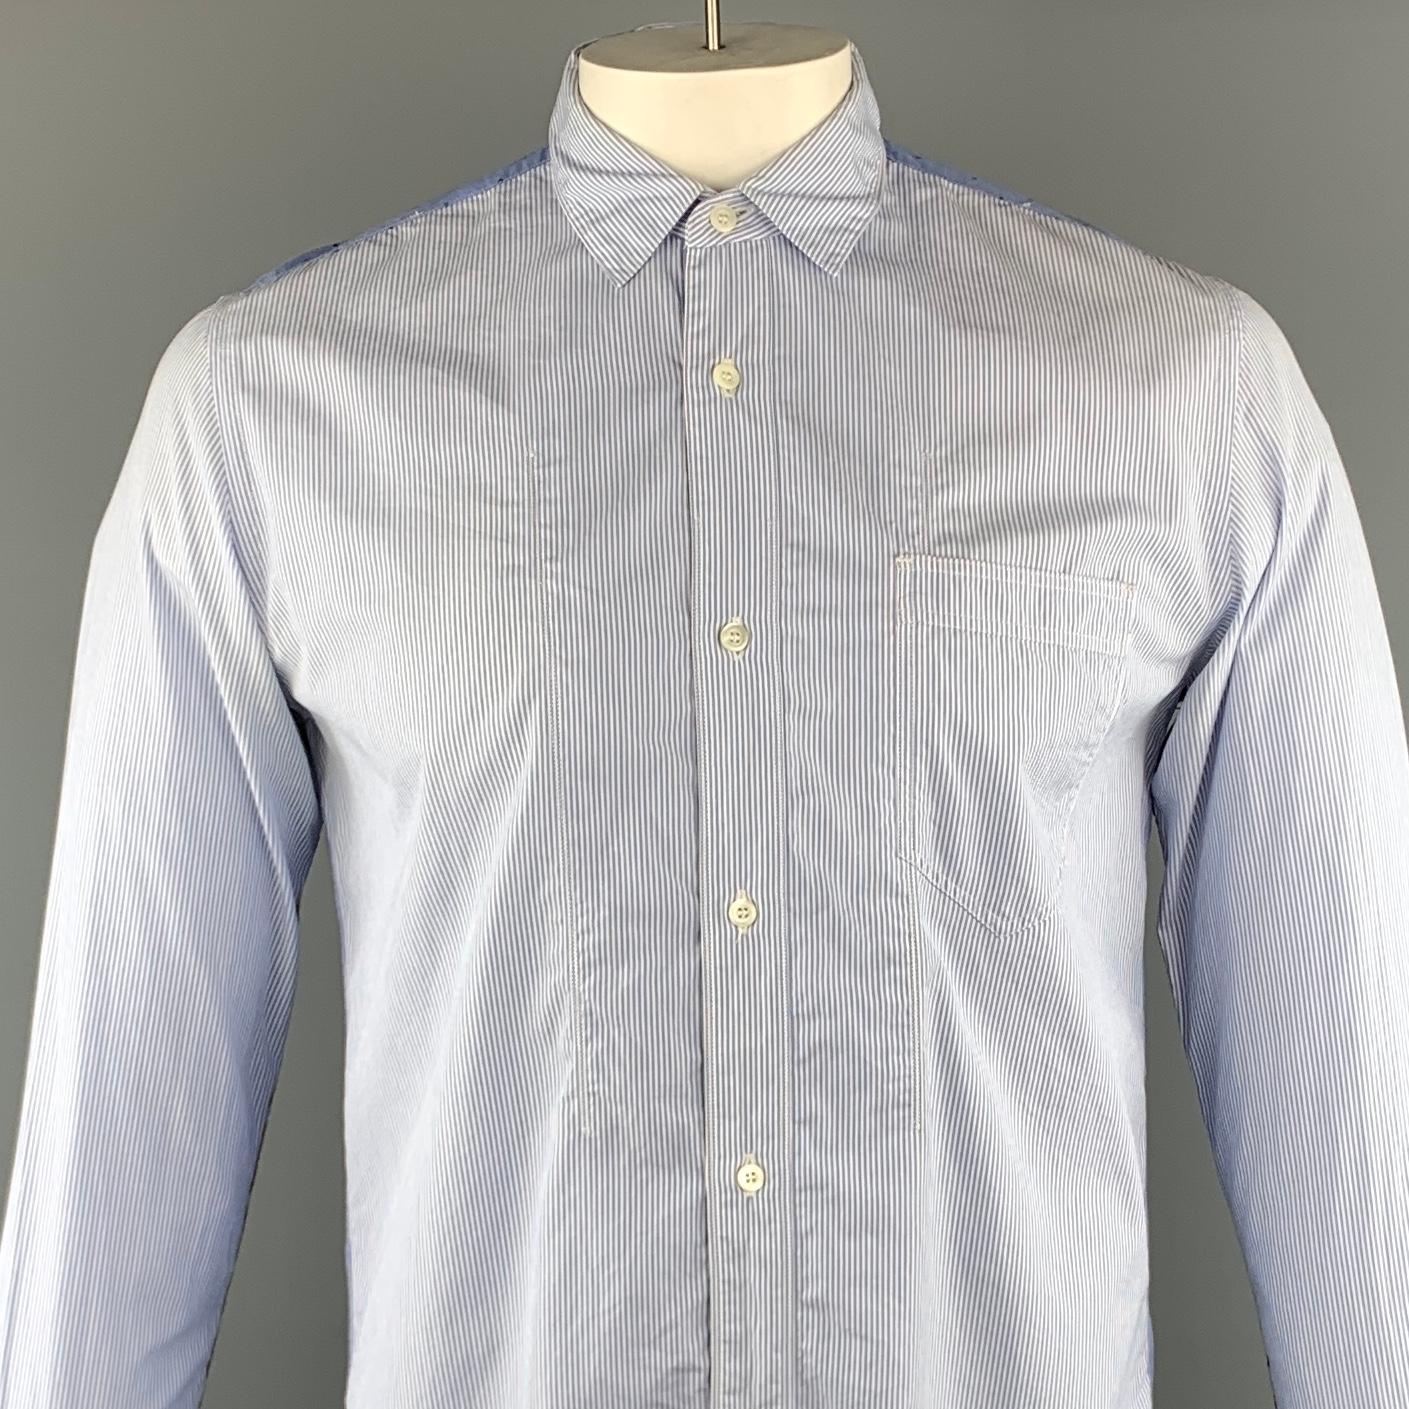 JUNYA WATANABE long sleeve shirt comes in a white and blue mixed fabric cotton featuring a button up style, sleeve paisley trim, back shoulder dotted trim, front patch pocket, and a spread collar. Made in Japan.
 
Excellent Pre-Owned